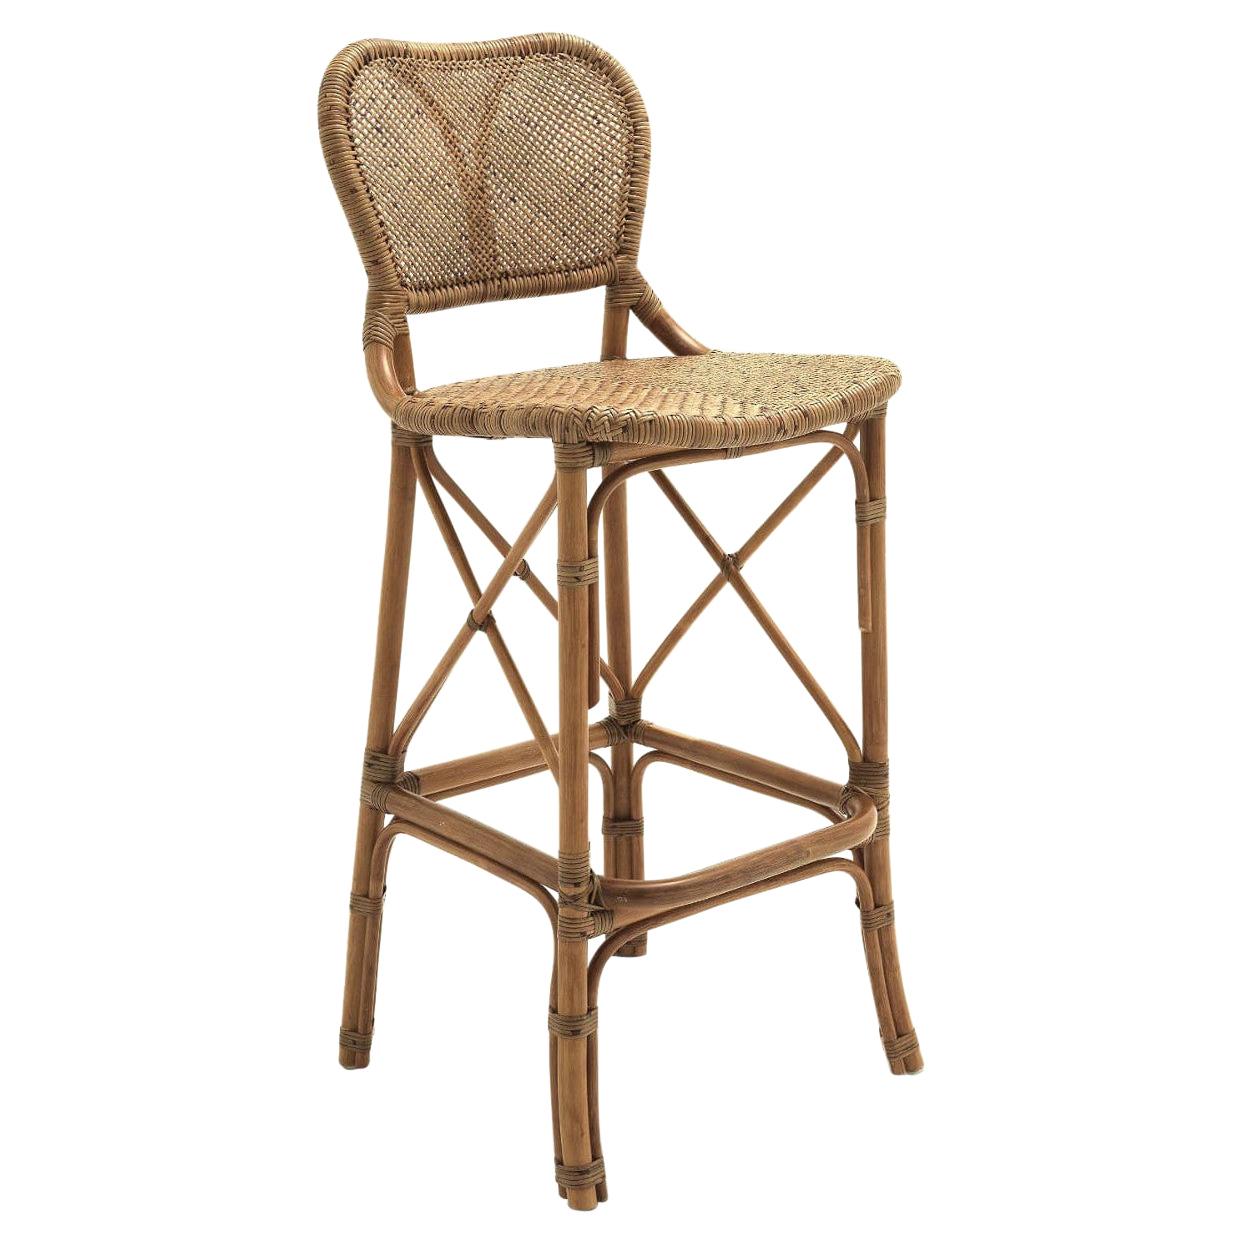 Handcrafted Curved Rattan and Braided Wicker Cane Bar Stool For Sale